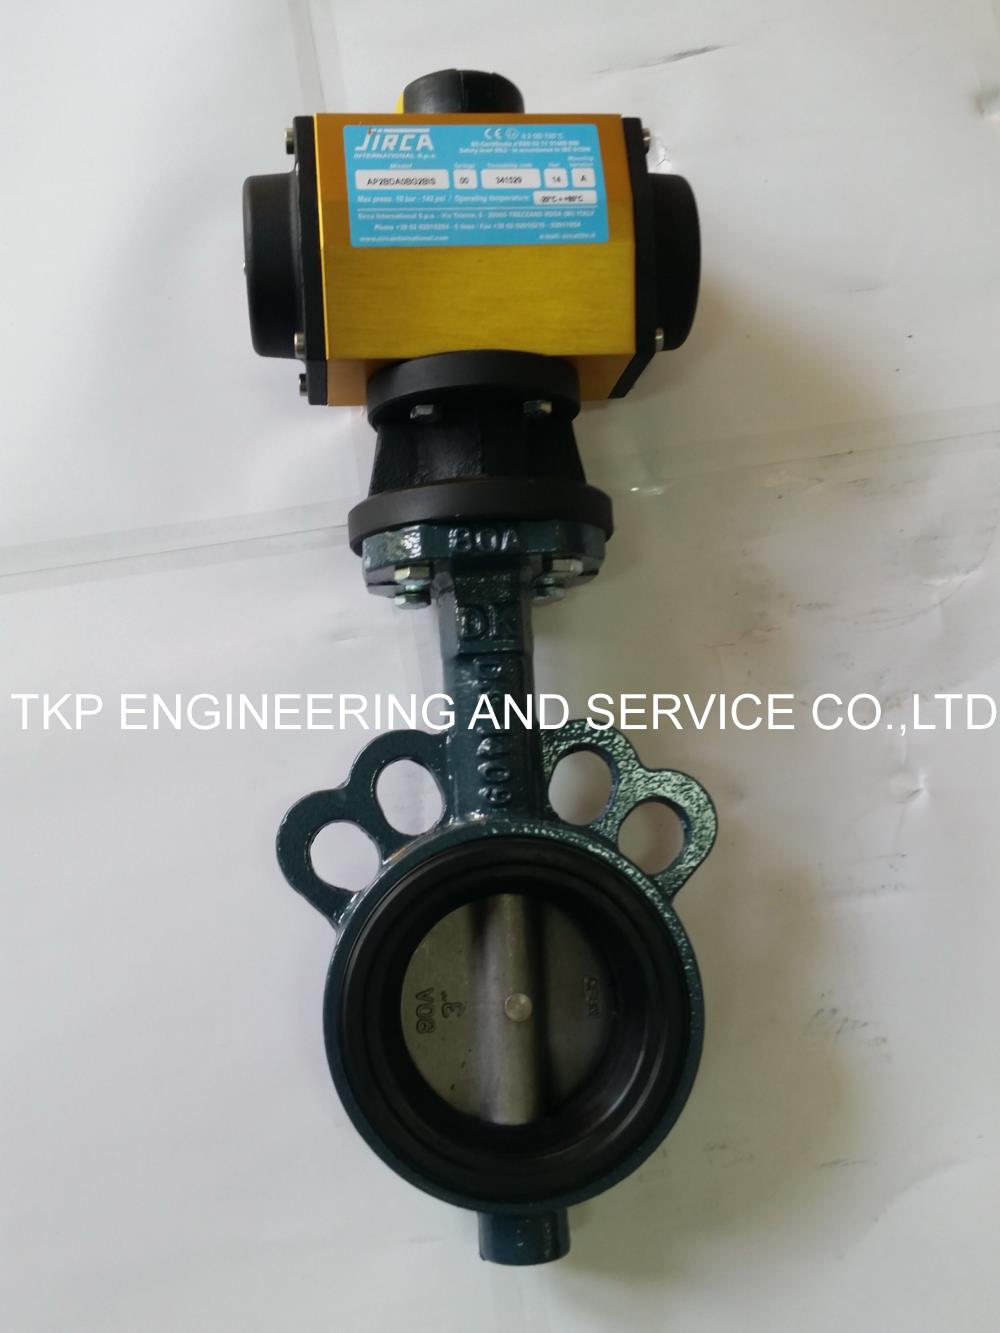 BUTTERFLY VALVE ACTUATOR,BUTTERFLY VALVE,DK WITH SIRCA,Pumps, Valves and Accessories/Valves/Butterfly Valves